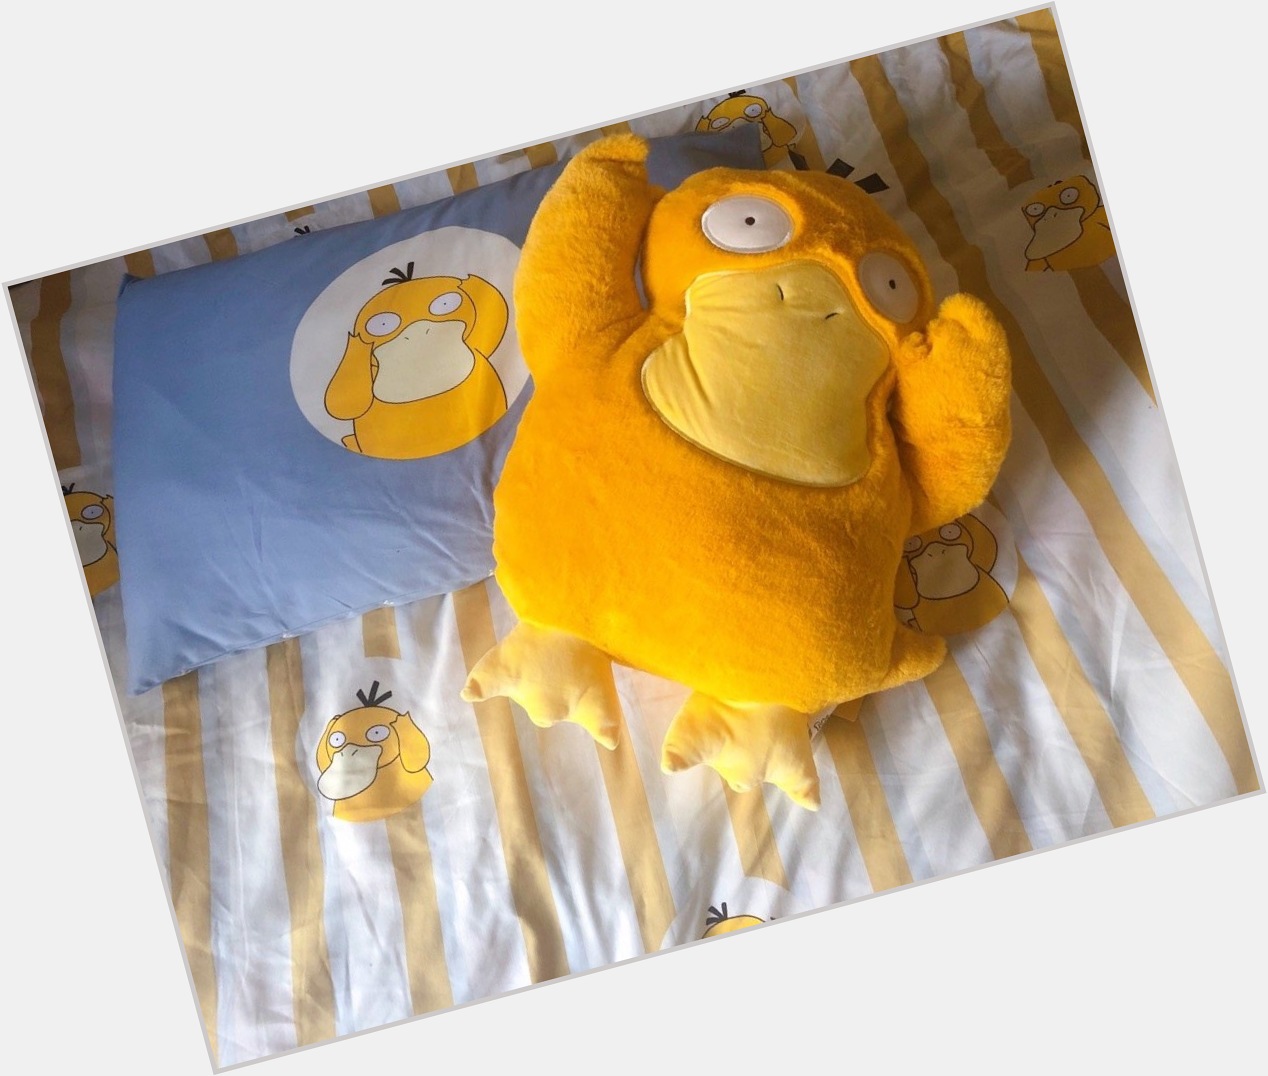   Happy Birthday! Hope you have Psyduck in your dream~ 